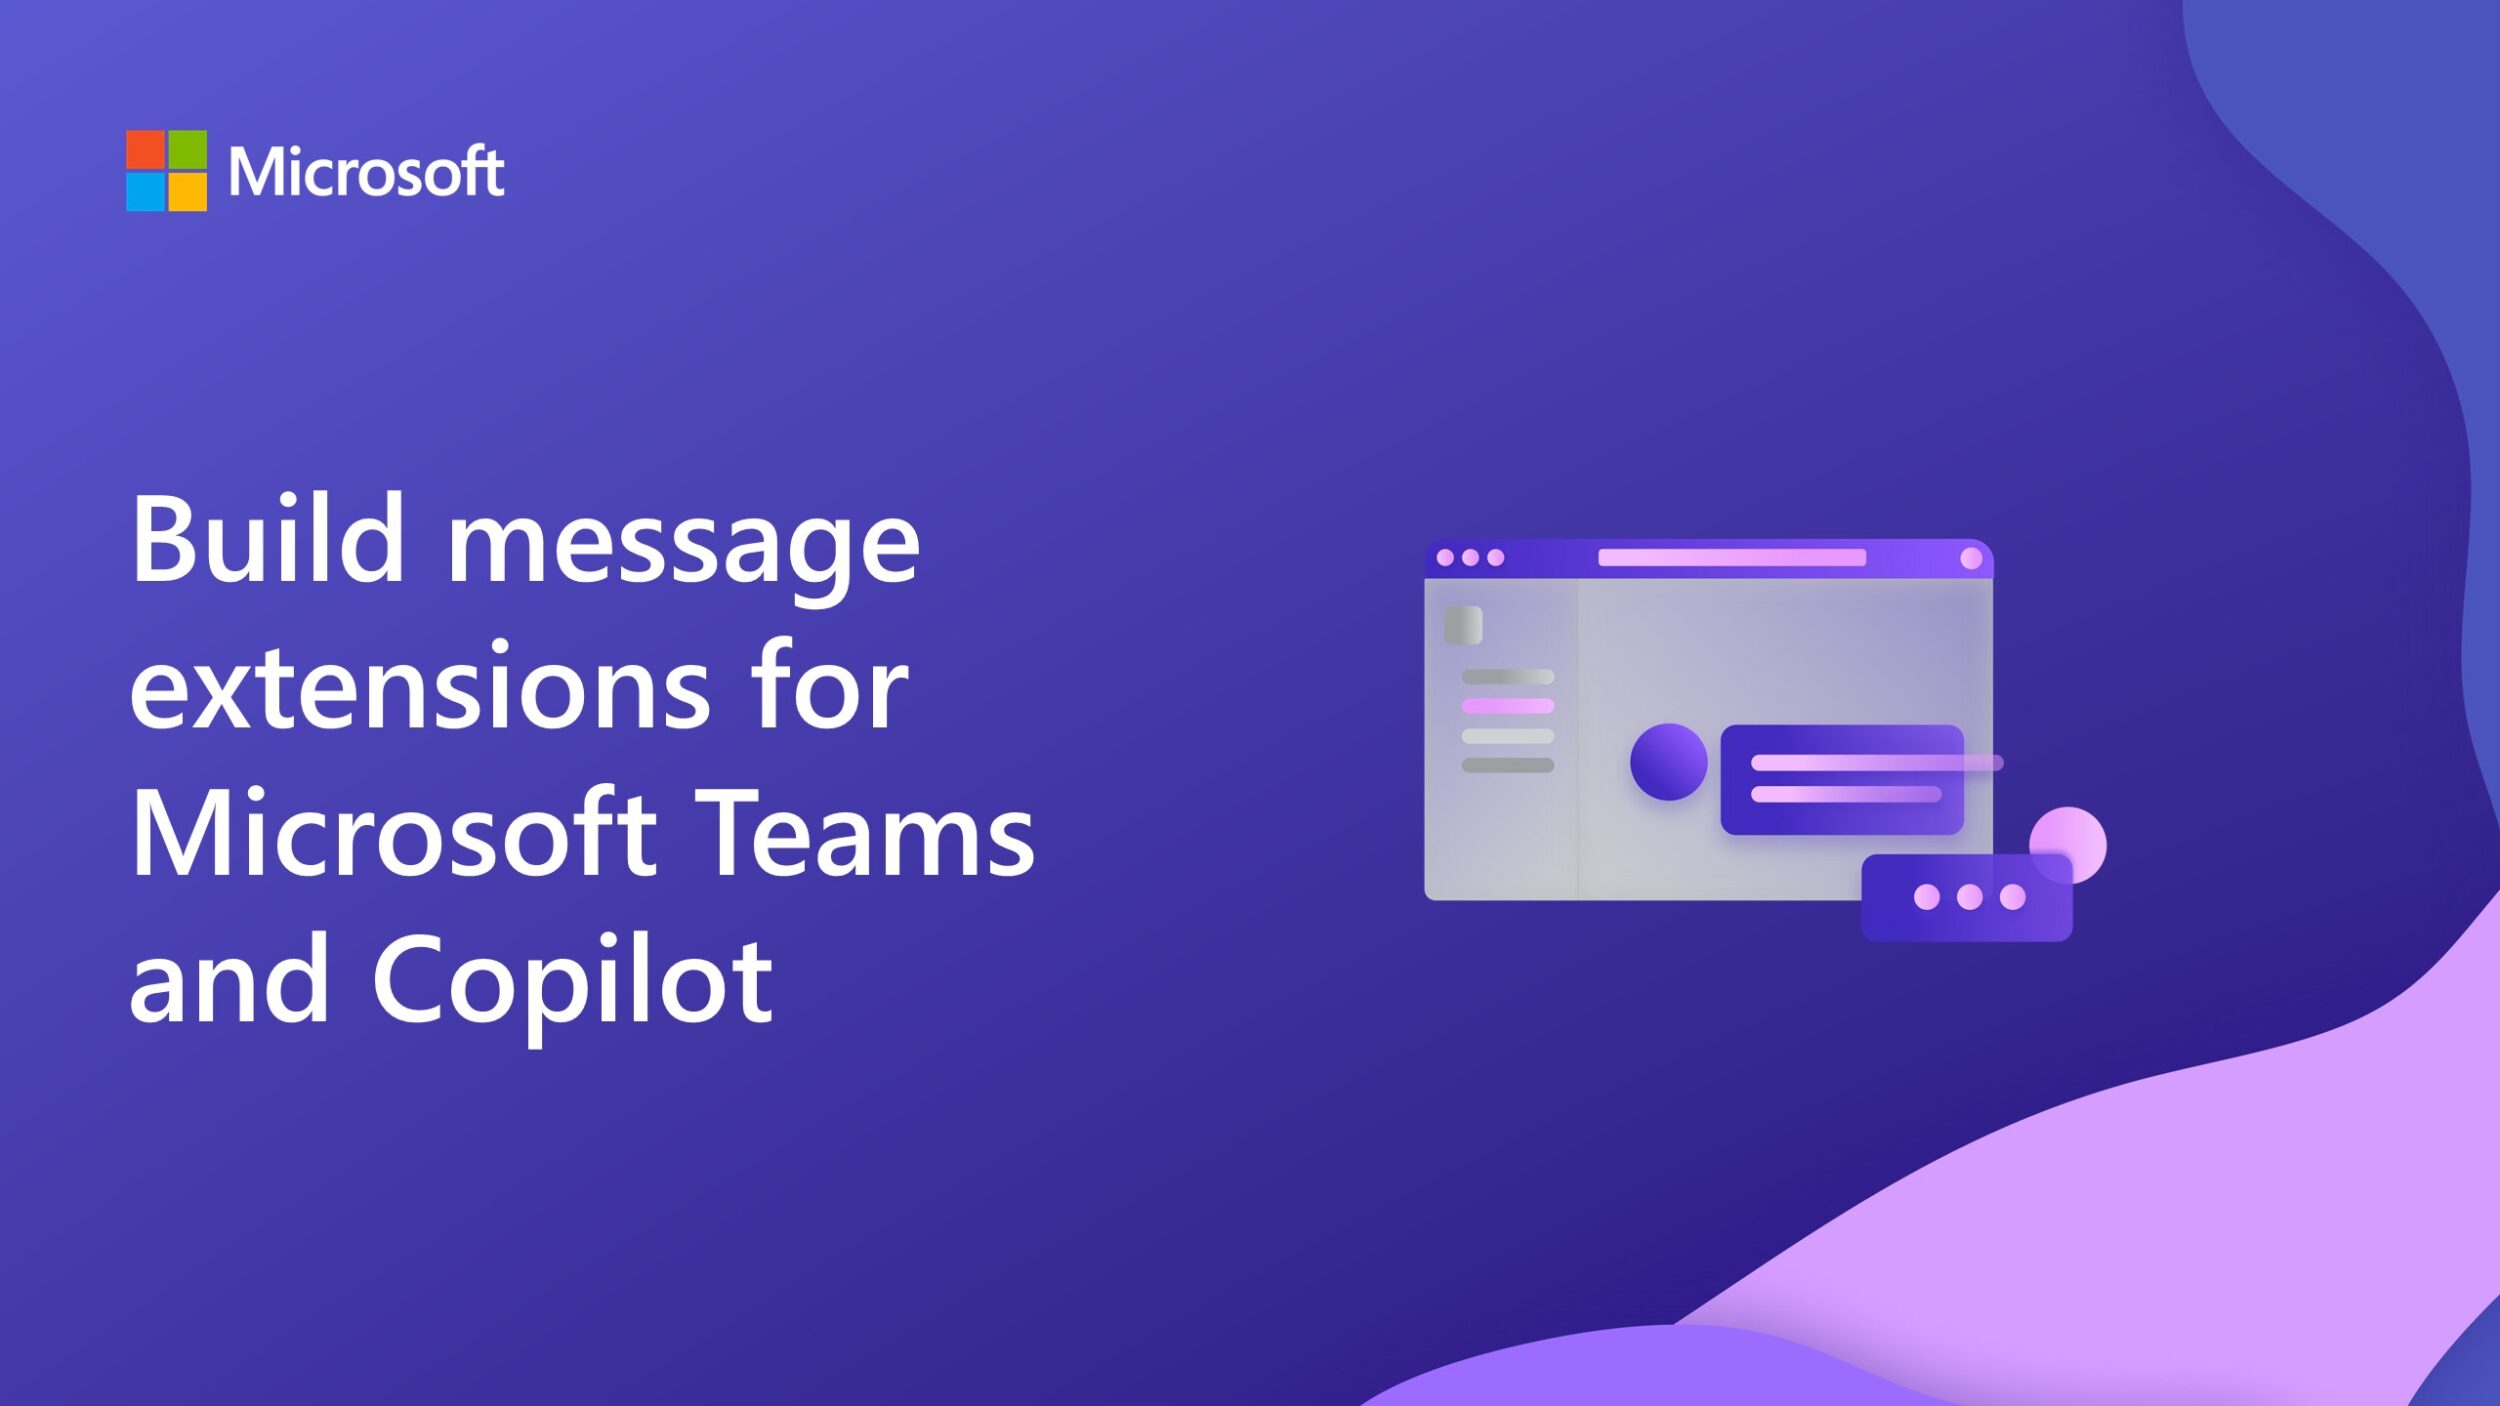 Build message extensions for Microsoft Teams and Copilot